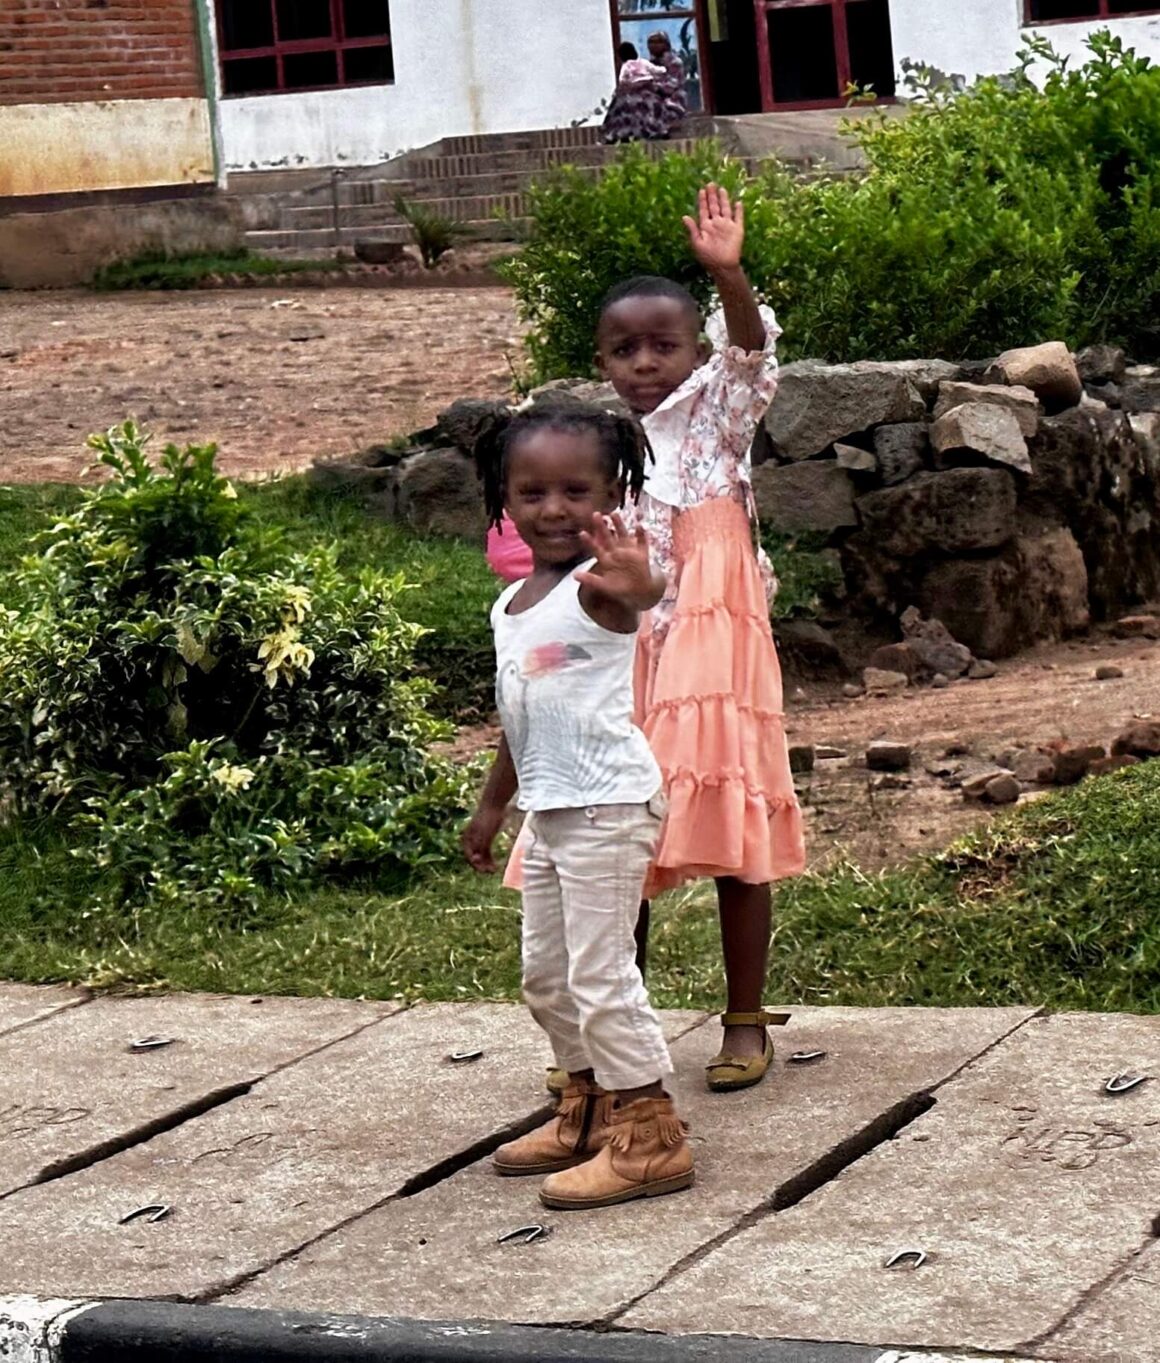 We saw these friendly young girls in Nyange waving to us